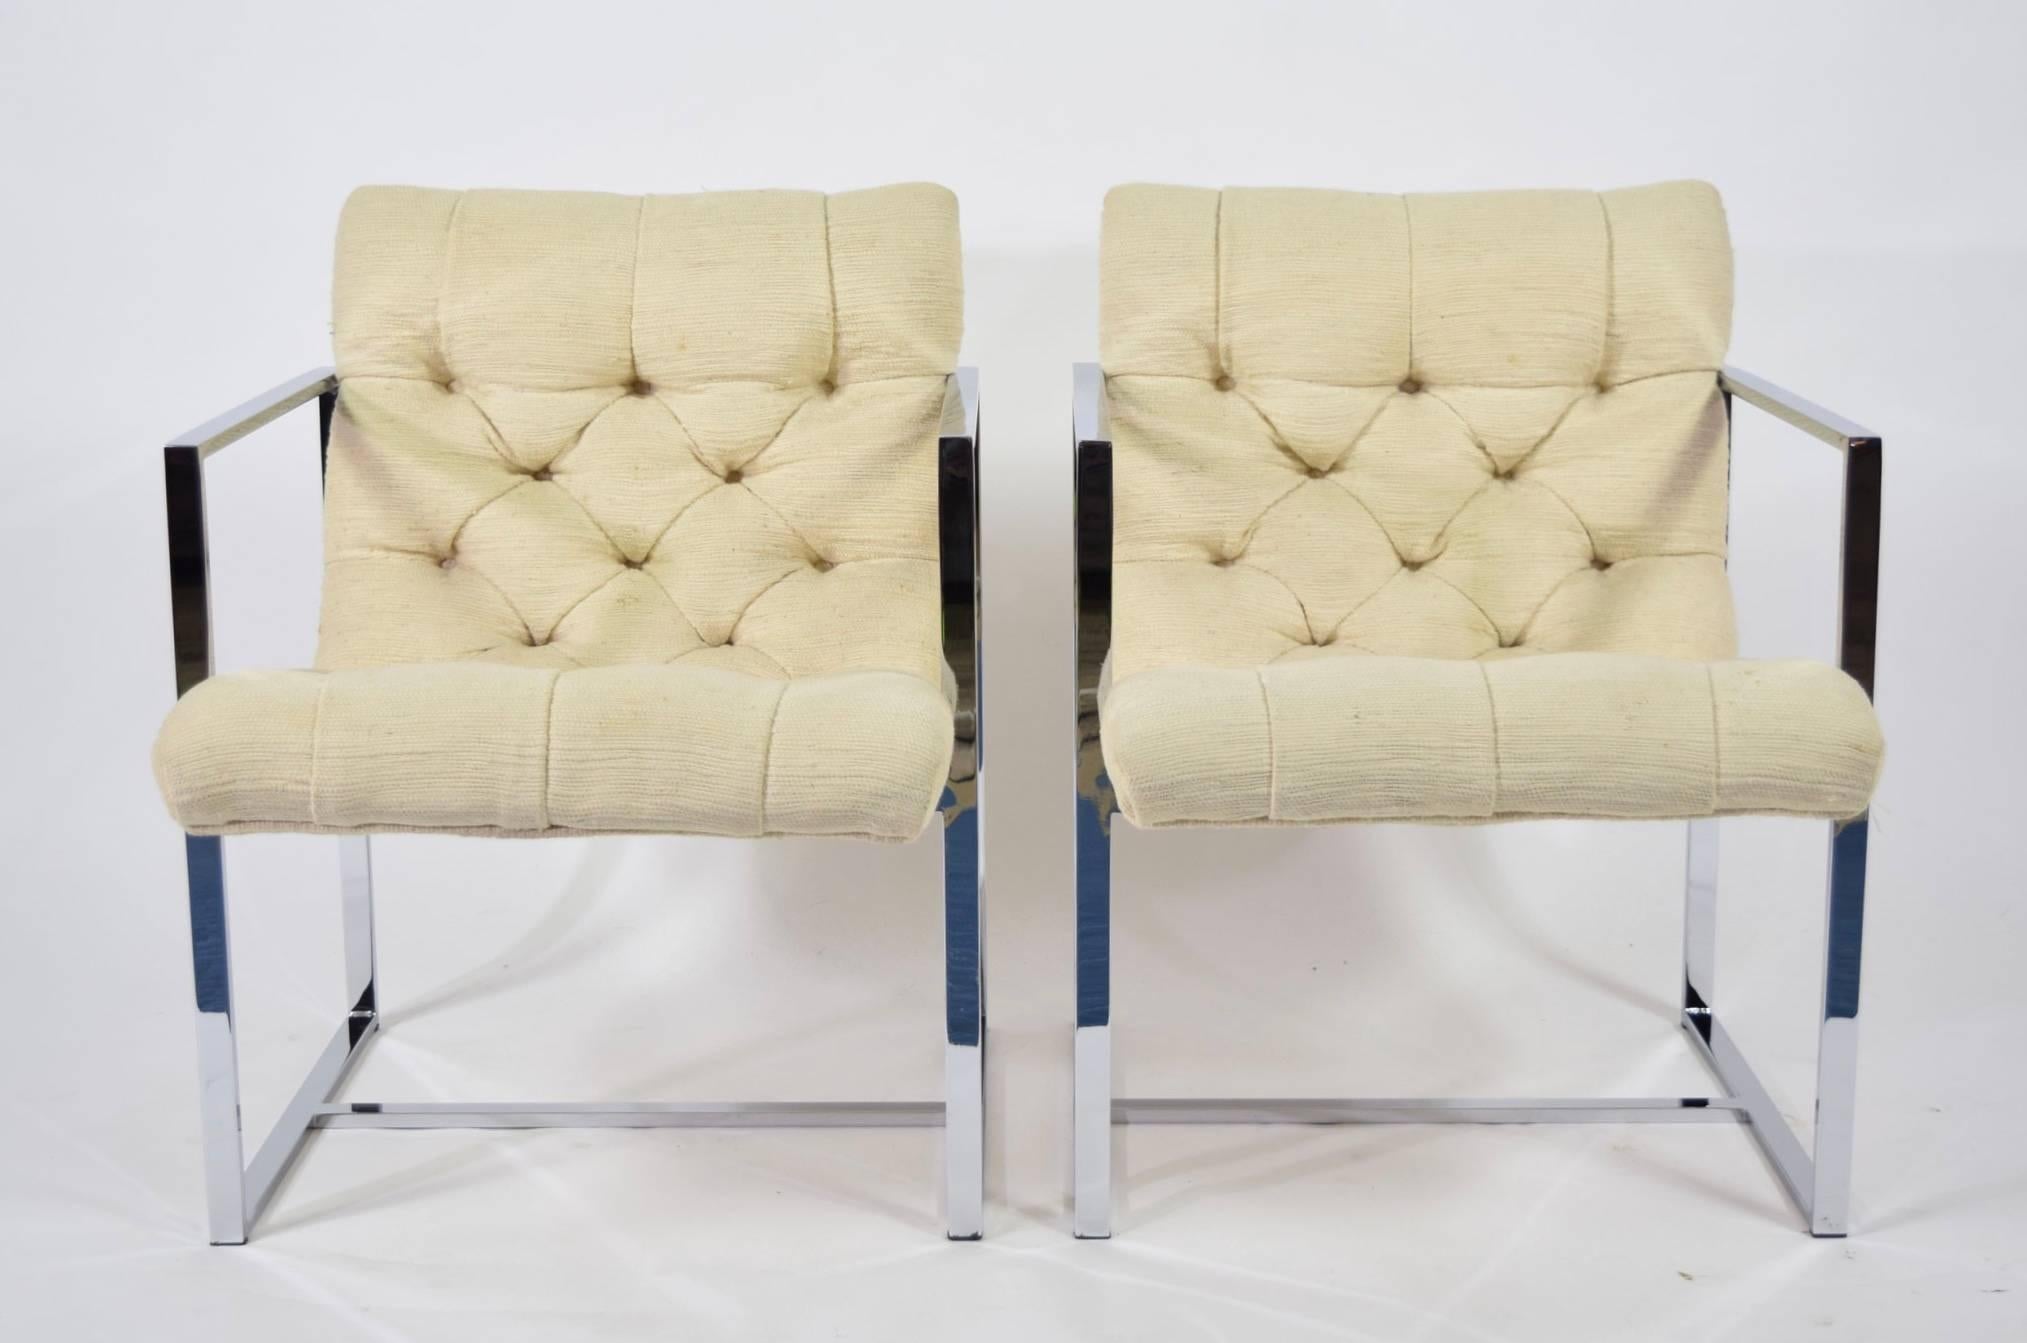 Pair of Milo Baughman Scoop lounge chairs. Chrome frame and tufted upholstery. Would benefit from cleaning or gorgeous new upholstery.